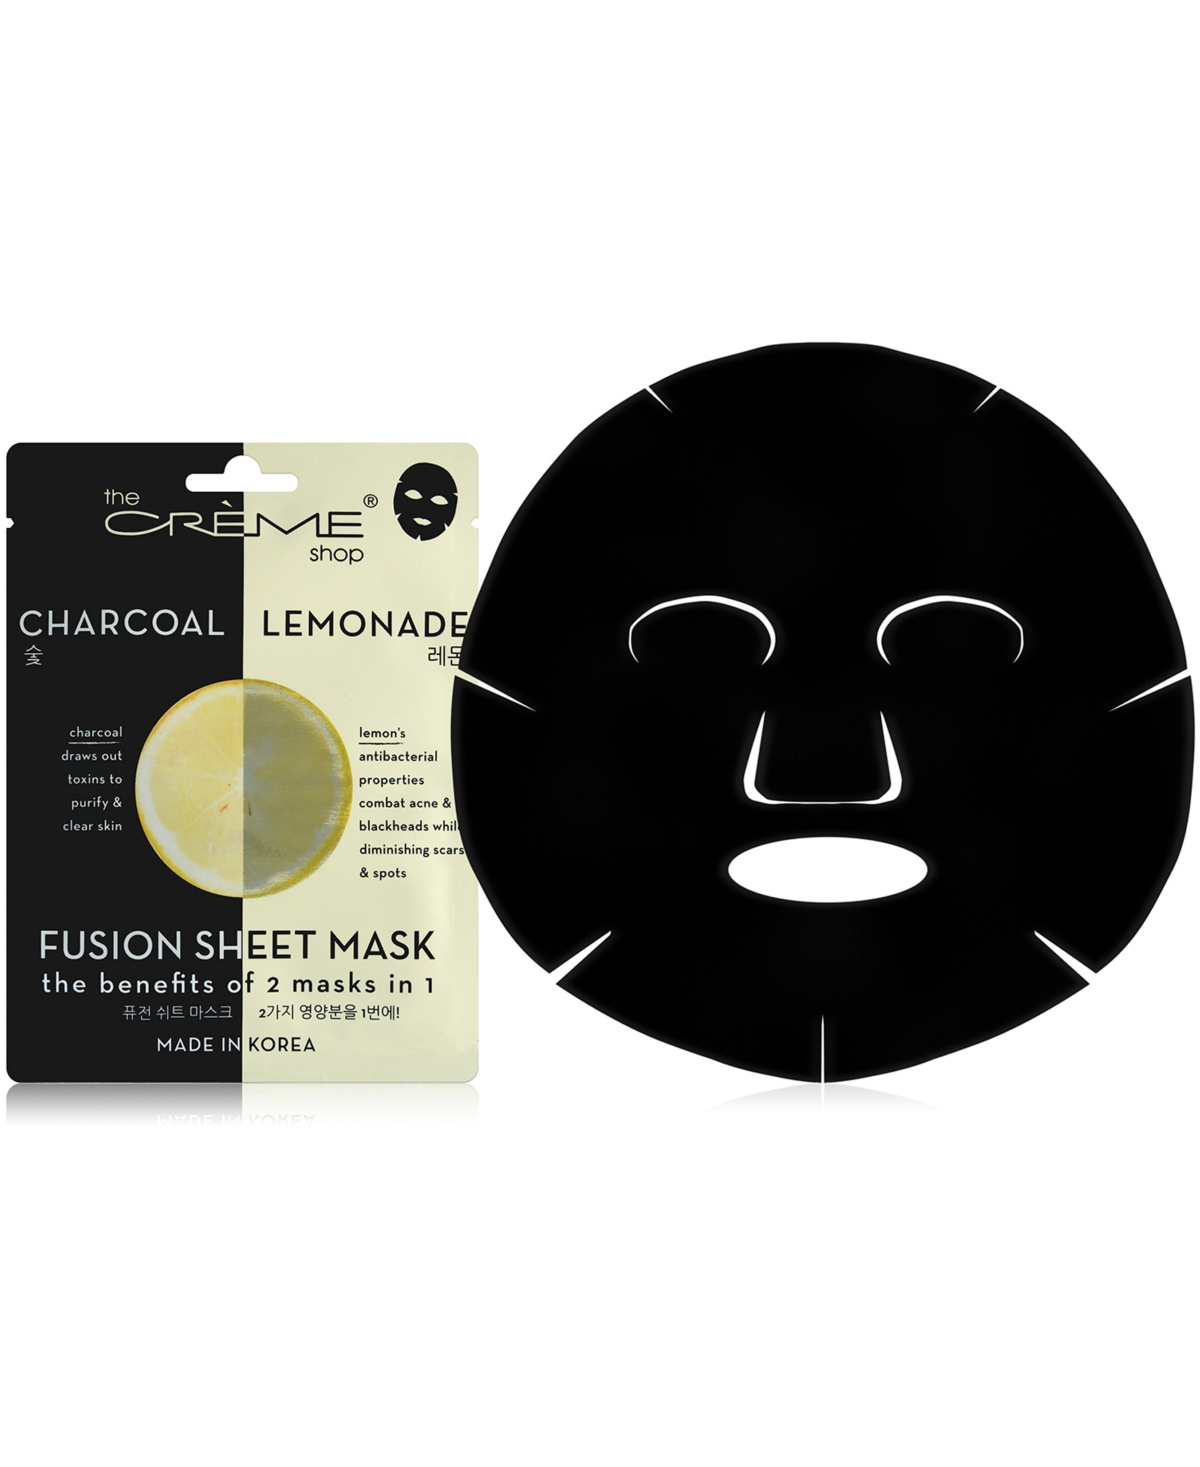 The Creme Shop 2-in-1 Fusion Sheet Mask In Charcoal,lemonade